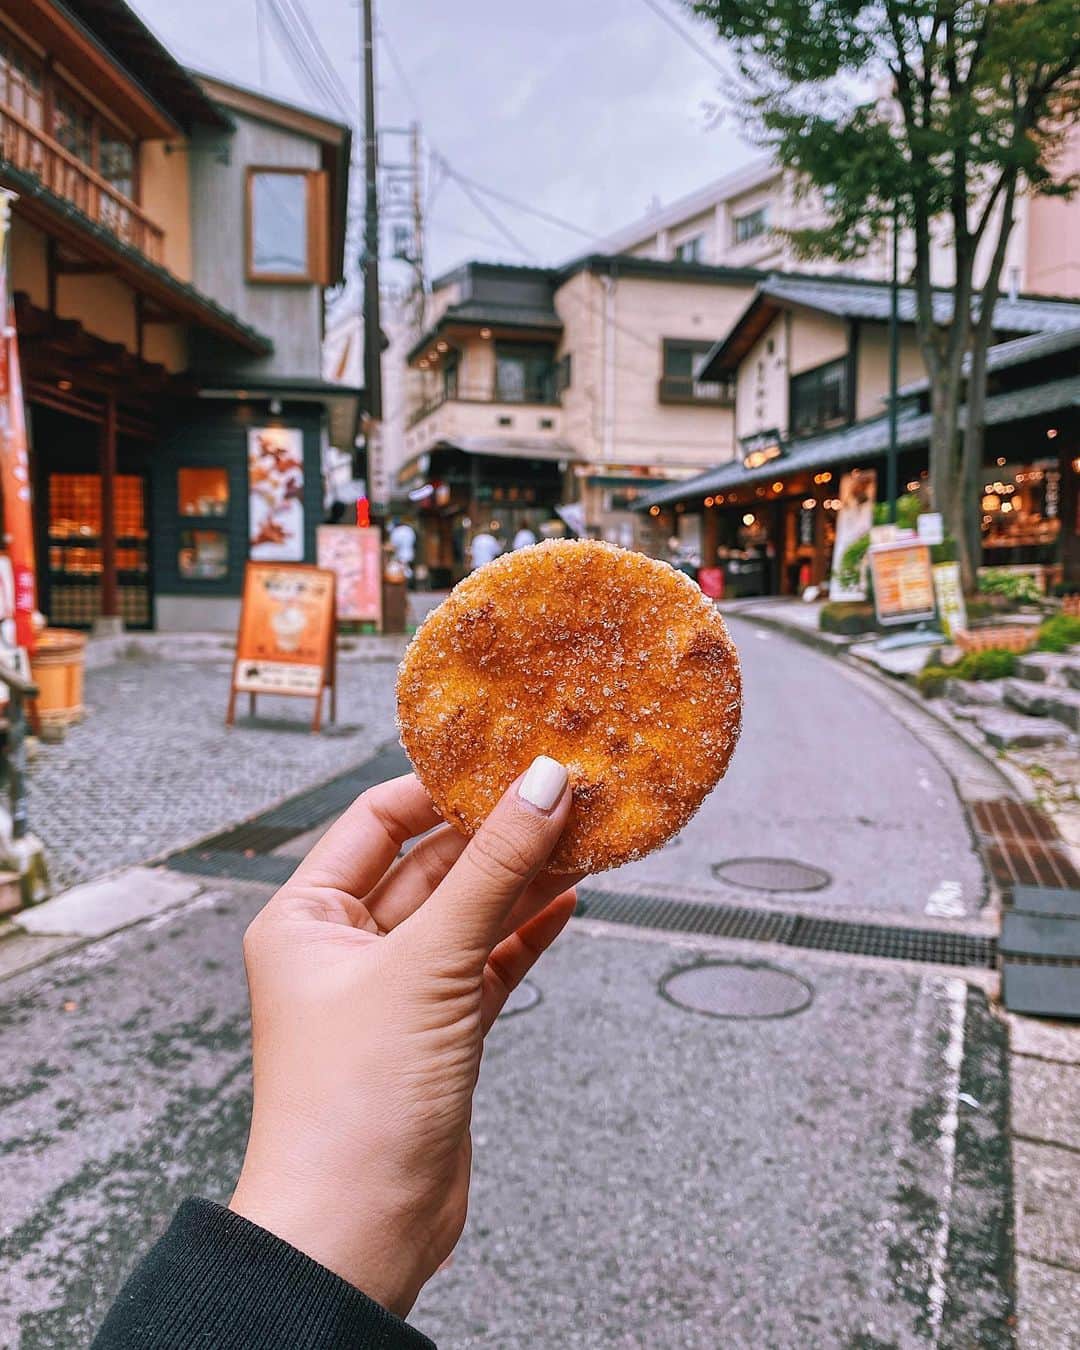 Girleatworldのインスタグラム：「Zarame Senbei (sugared rice crackers) while walking around Kusatsu Onsen town.  Usually senbei is savory with bits of seaweed, but this one is coated with Zarame (large crystal) sugar. It is sweet but still retain that a hint of soy saltiness similar to other senbeis.  Kusatsu is such a charming little town. The entire vibe of the city reminds me of Spirited Away, and it's made extra whimsical on cold nights since the natural hot spring would occasionally stir up steam into the air.  The hot spring water in Kusatsu famous as it is high in acidity and bacterial power, which is believed to be beneficial for skin. Many visitors would dress up in a Yukata (japanese summer wear) ang Geta (wooden slipper) while going to an onsen.  More details on my 5-day Nagano trip is up on my blog! Click the link in my profile ☝🏻 #shotoniphone #shotoniphone11promax #zaramesenbei #senbei #kusatsuonsen #kusatsu  #japan #japanesefood #🇯🇵」